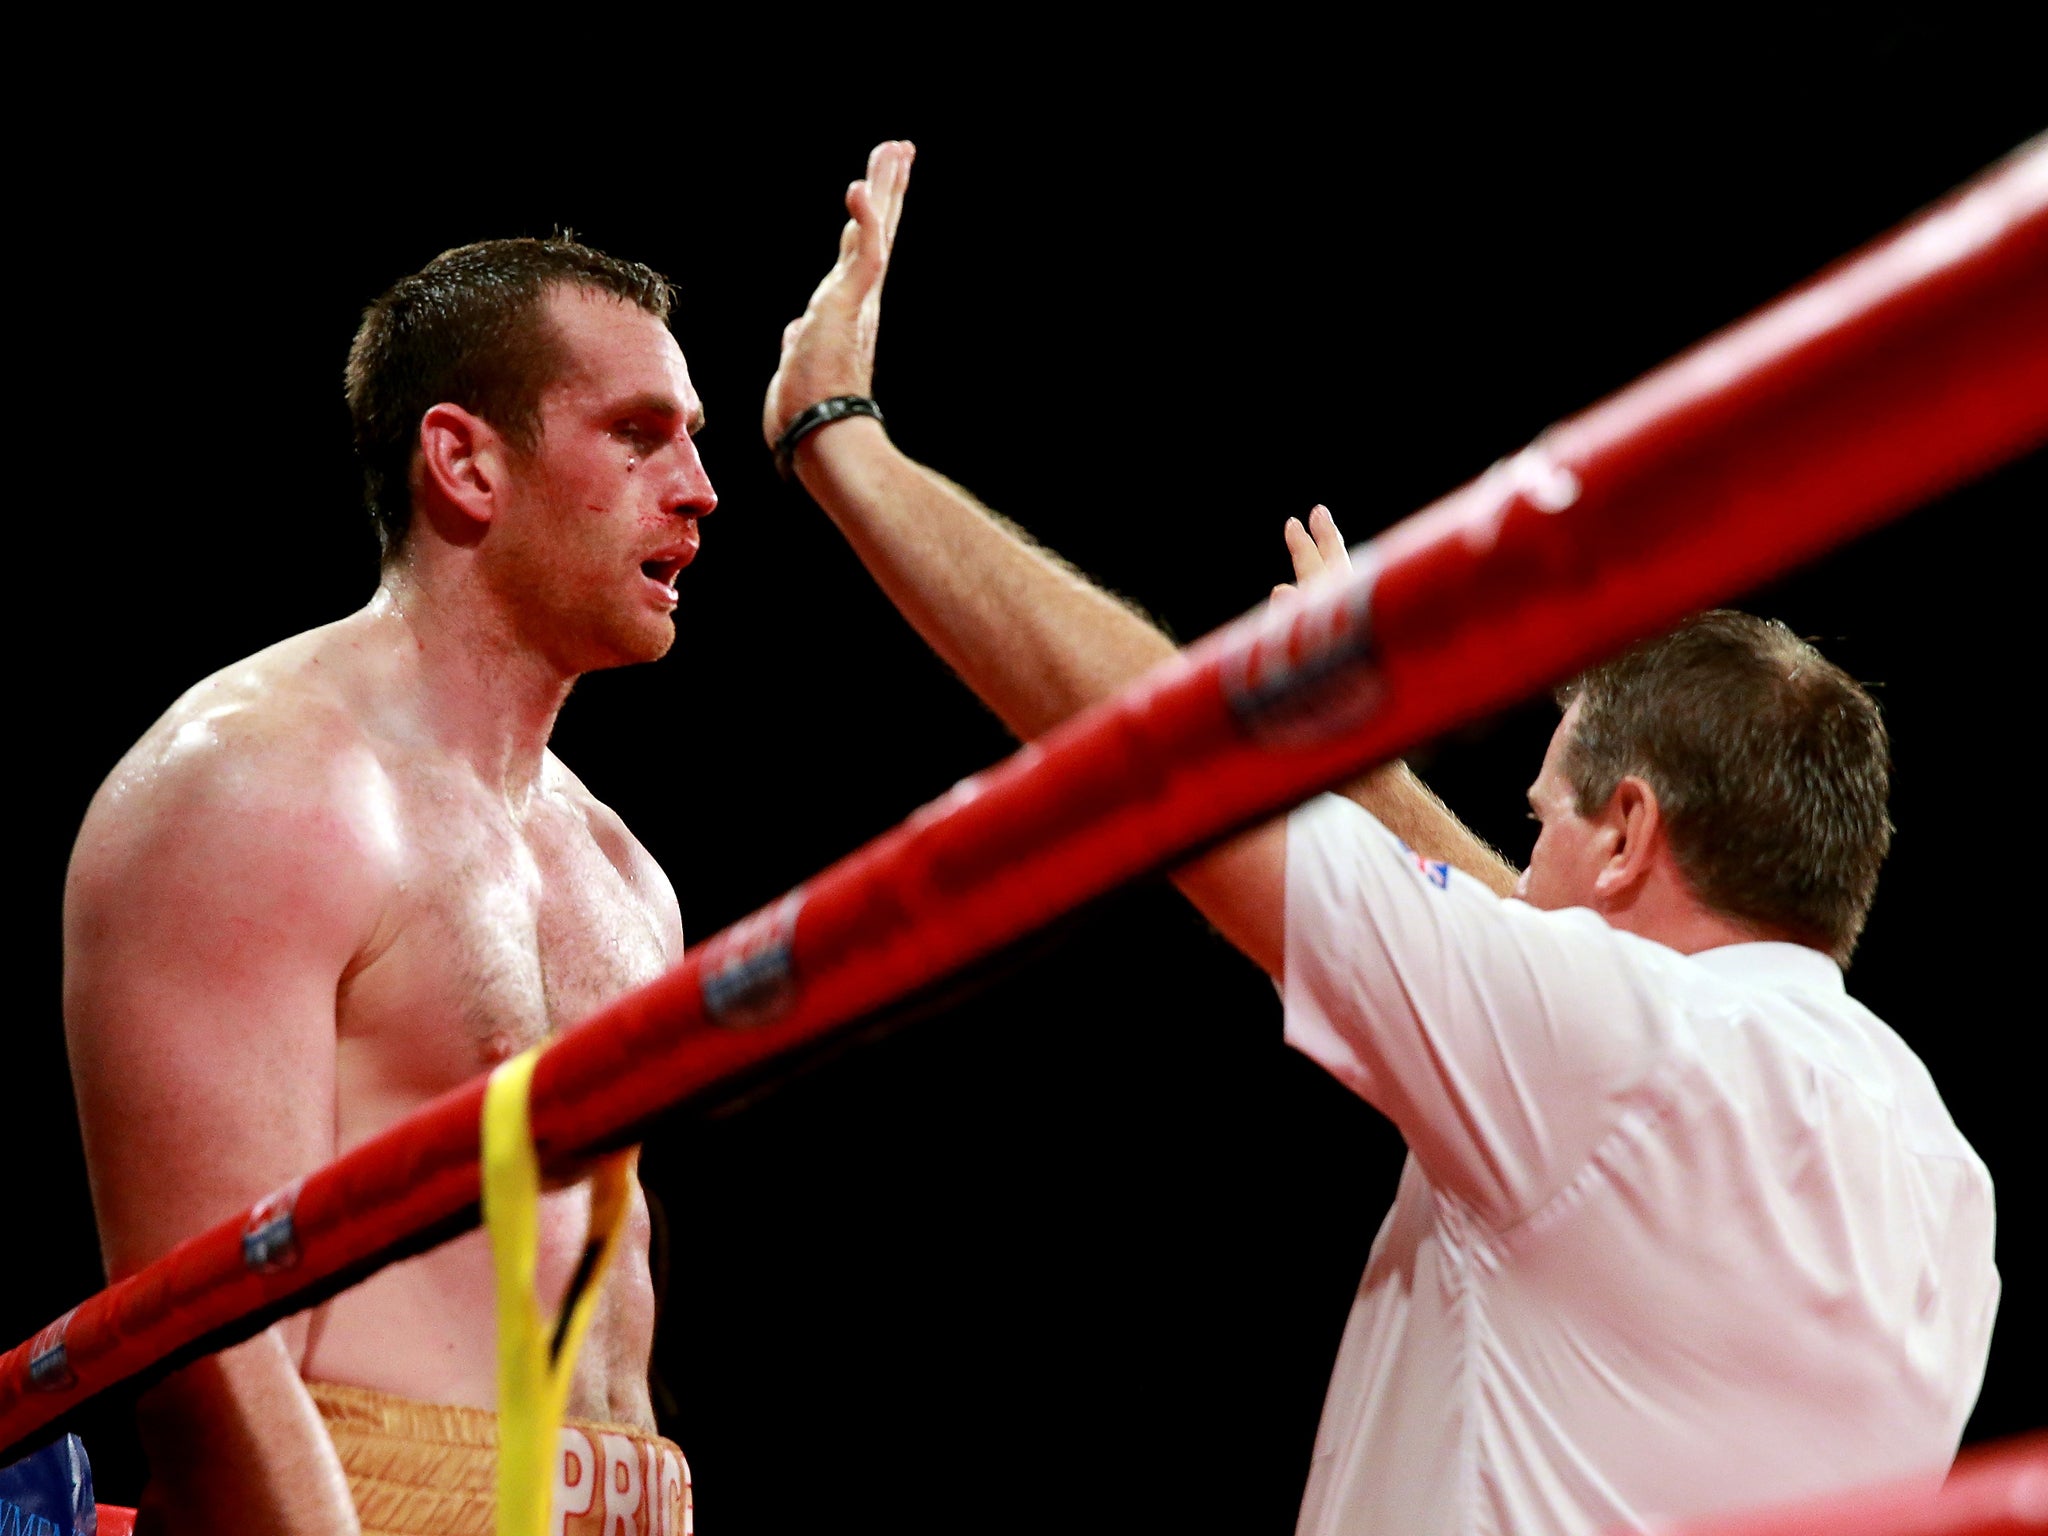 David Price is ruled to be unable to carry on boxing as he loses to Tony Thompson